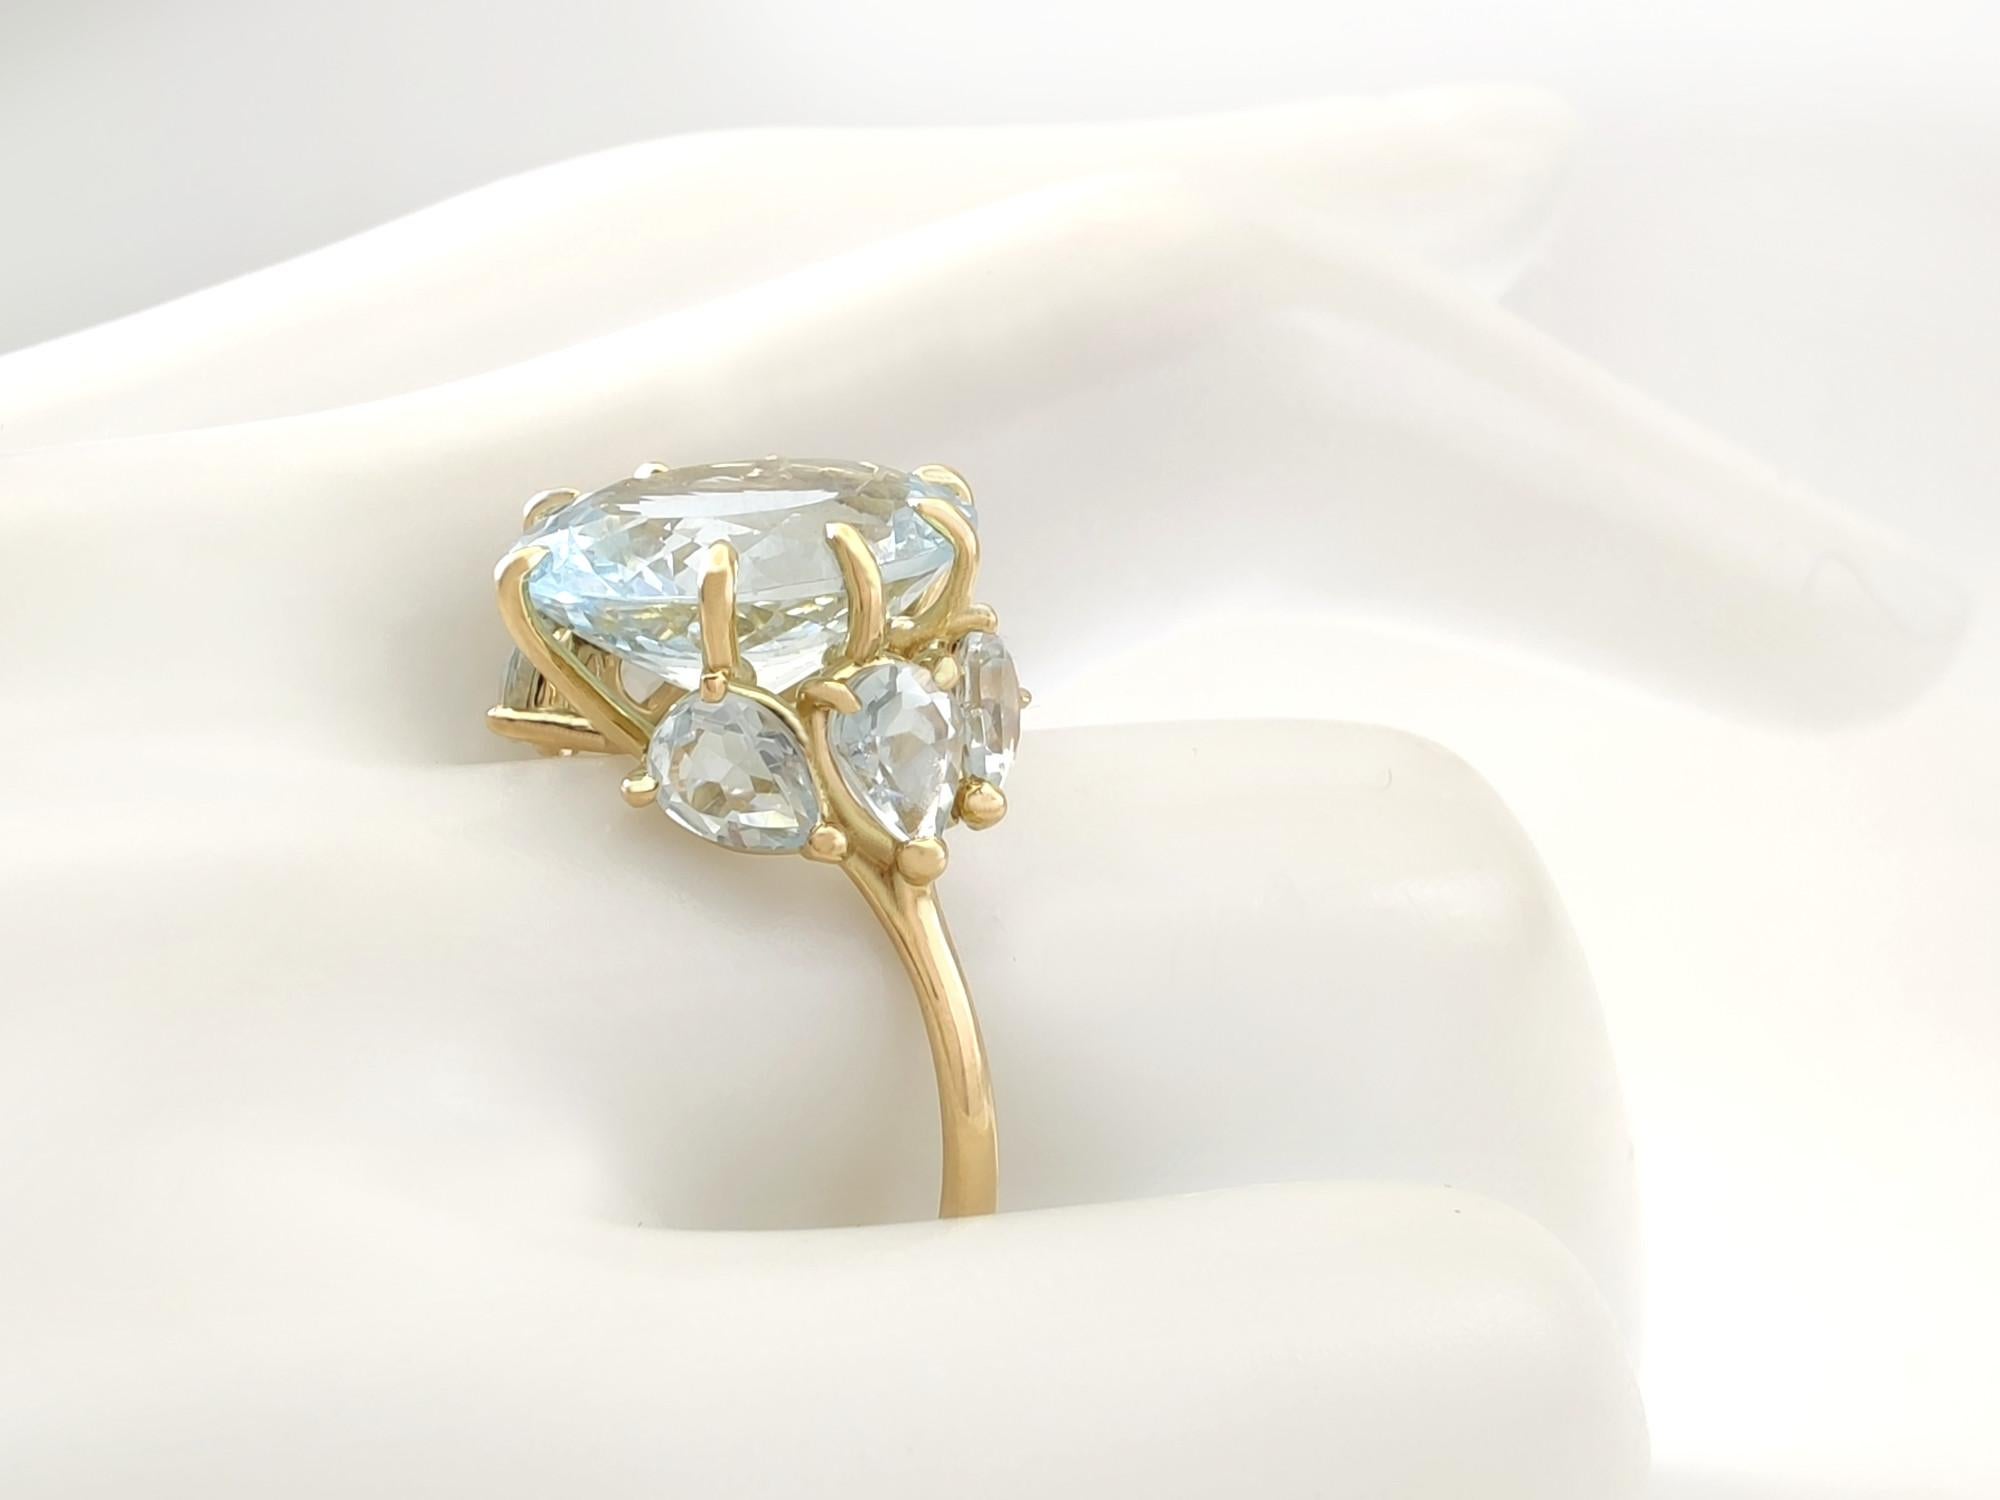 Handmade 4.8 Carat Oval Aquamarine Cocktail Ring in 18K Yellow Gold For Sale 5